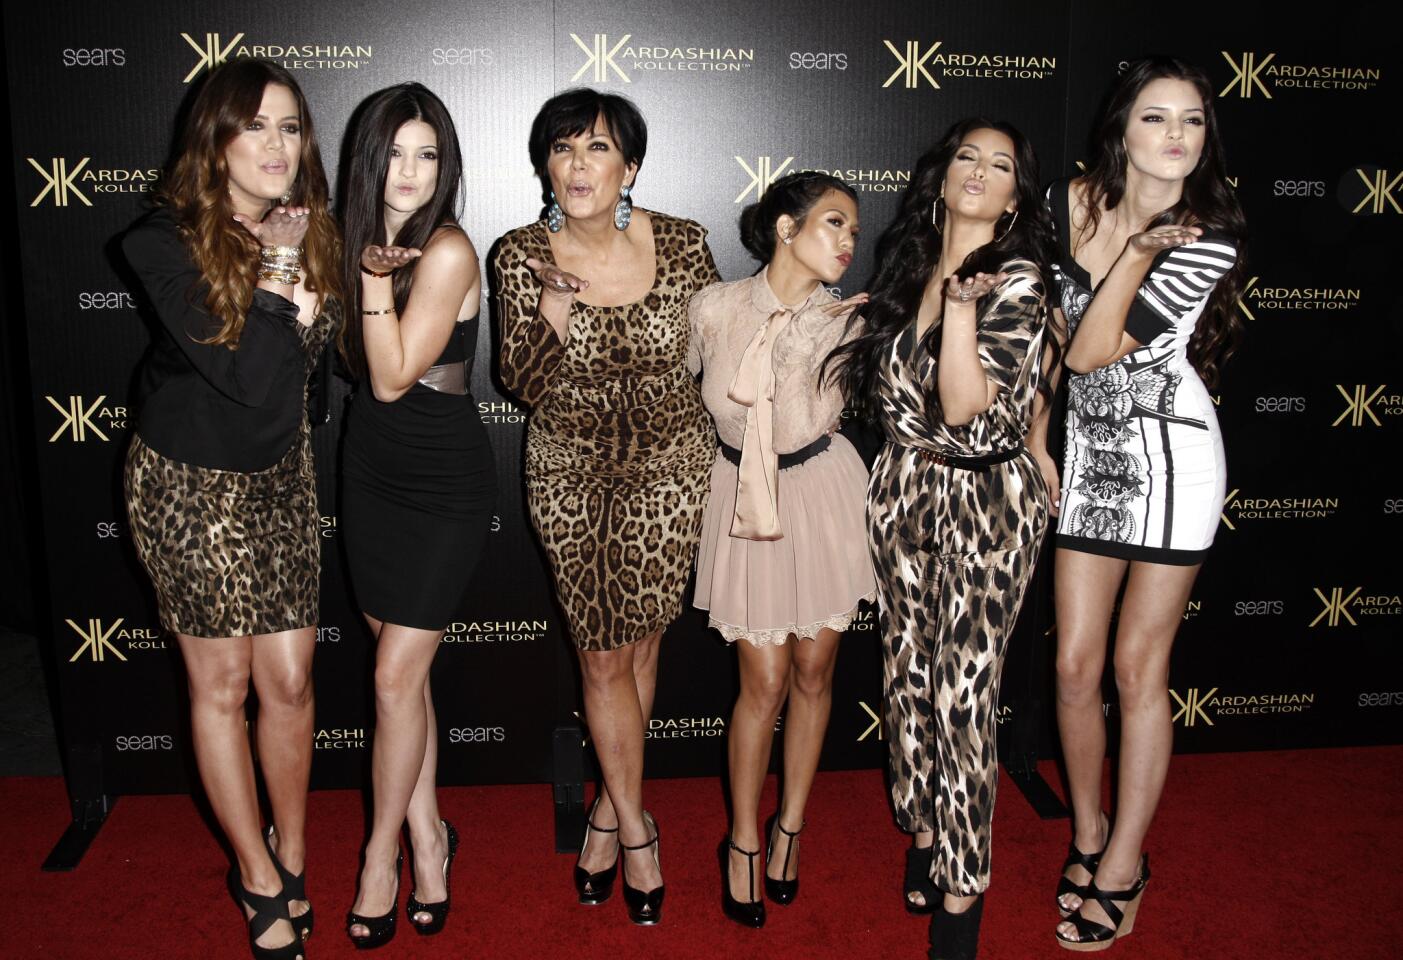 E! confirmed Tuesday the Kardashian brood has signed a three-year deal with it. The pact gives viewers three more seasons of the network's flagship "Keeping Up With the Kardashians," taking the show into Season 9. It also covers the entire Kardashian litter, including those who don't boast the last name formally.